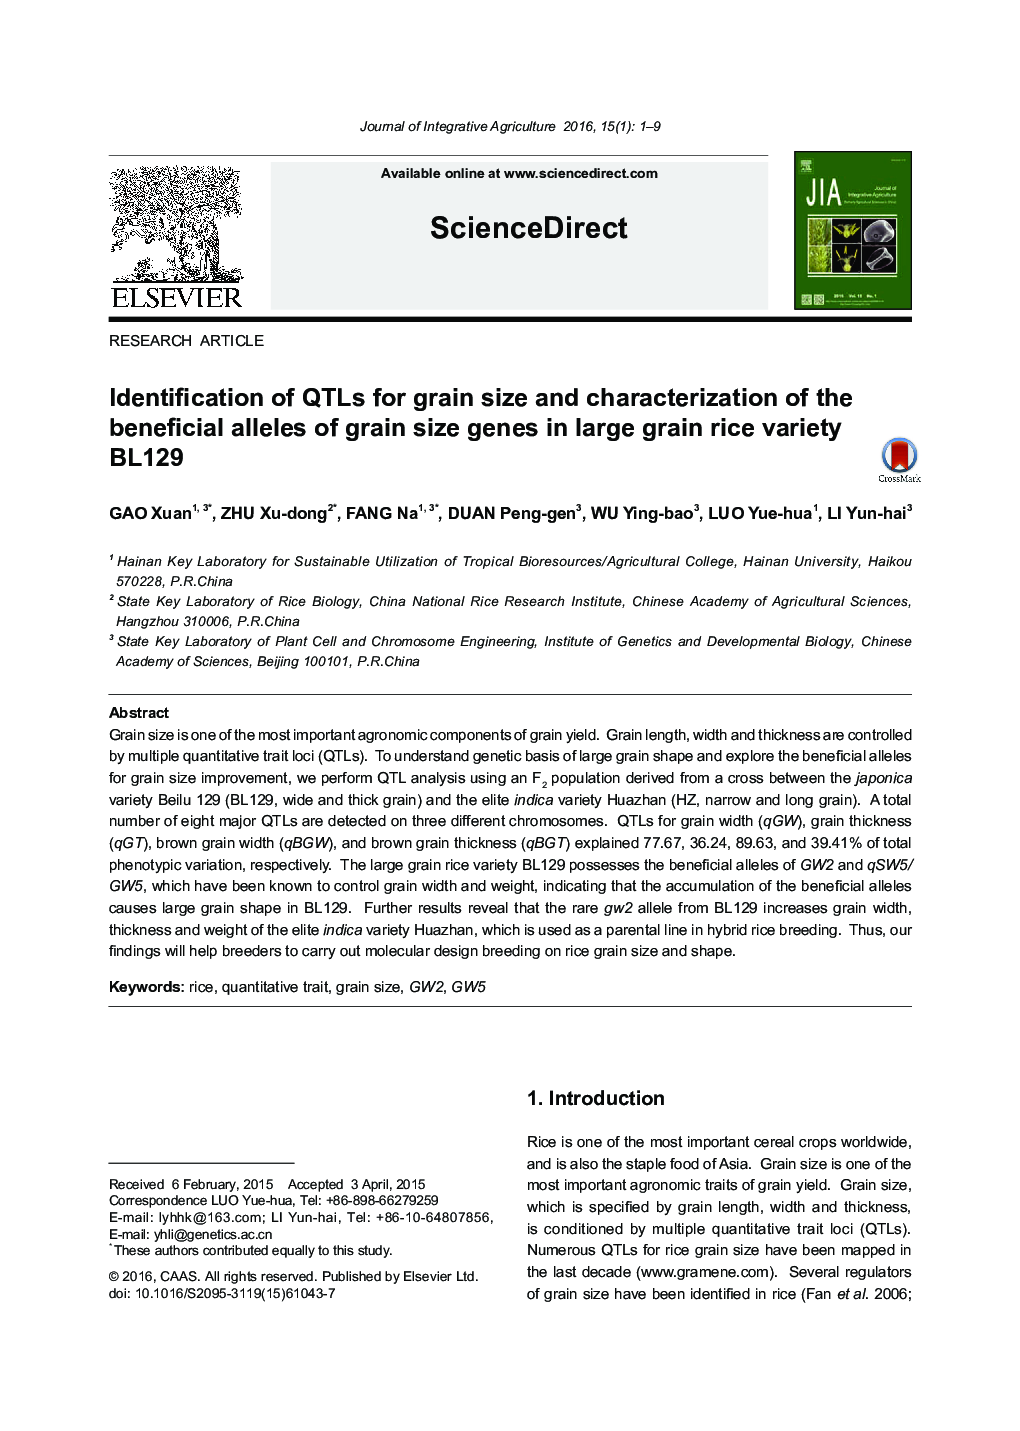 Identification of QTLs for grain size and characterization of the beneficial alleles of grain size genes in large grain rice variety BL129